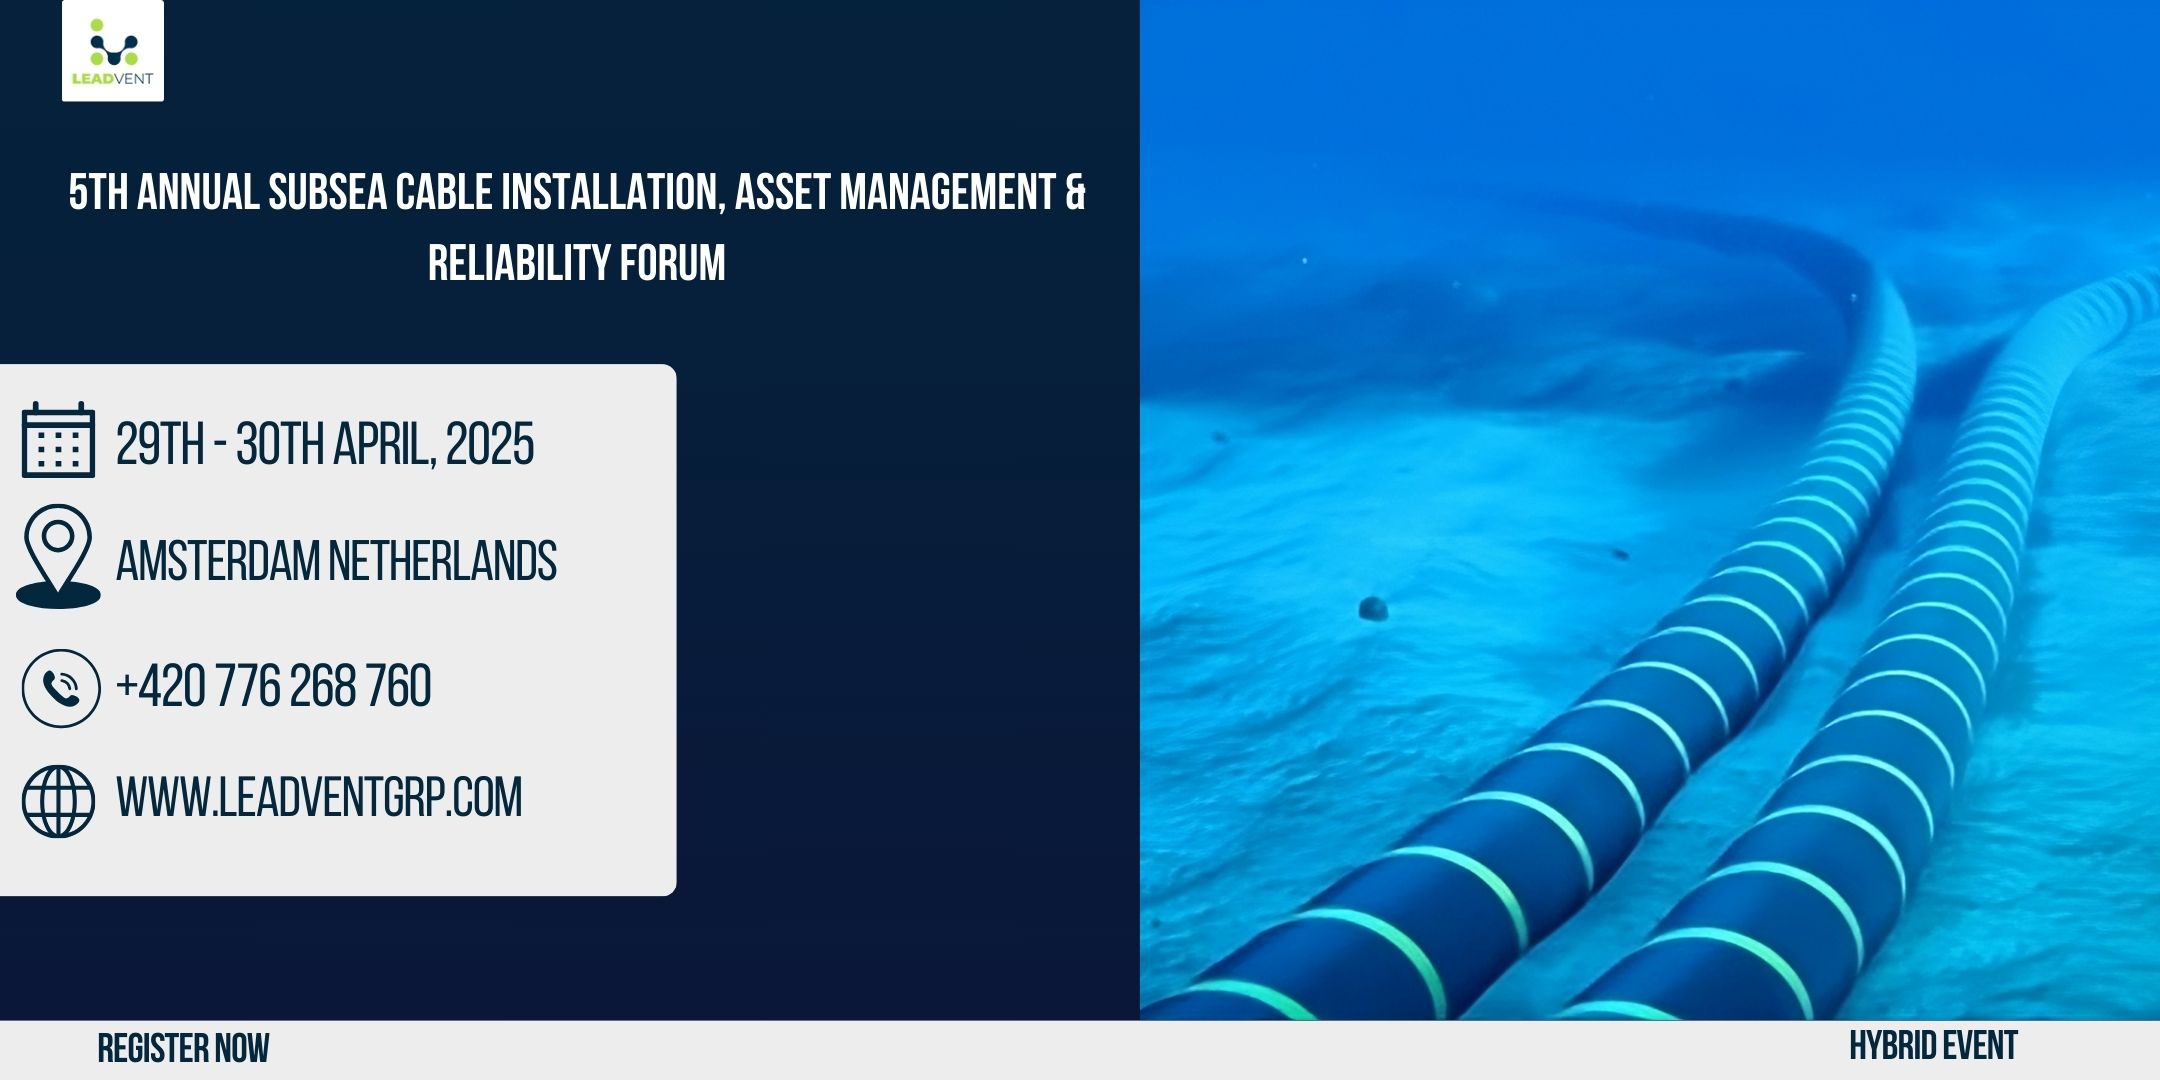 5th Annual Subsea Cable Installation, Asset Management & Reliability Forum organized by Leadvent Group